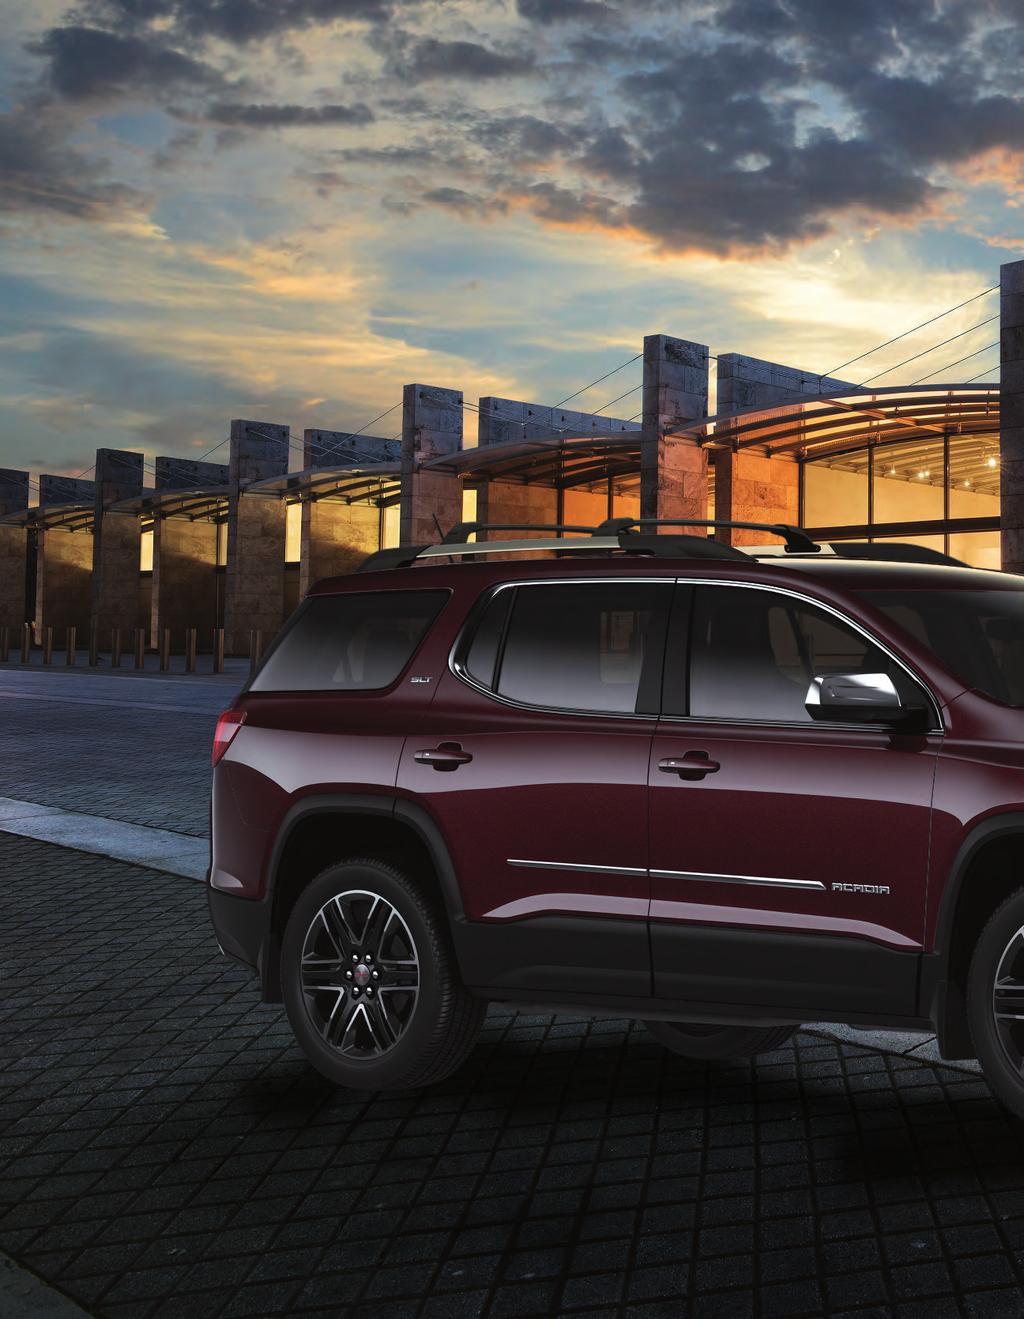 2018 ACADIA 2018 Acadia SLE shown with these available accessories: Grille Insert in Black, Roof Rack Cross Rail Package in Black, Chrome Outside Rearview Mirror Caps,